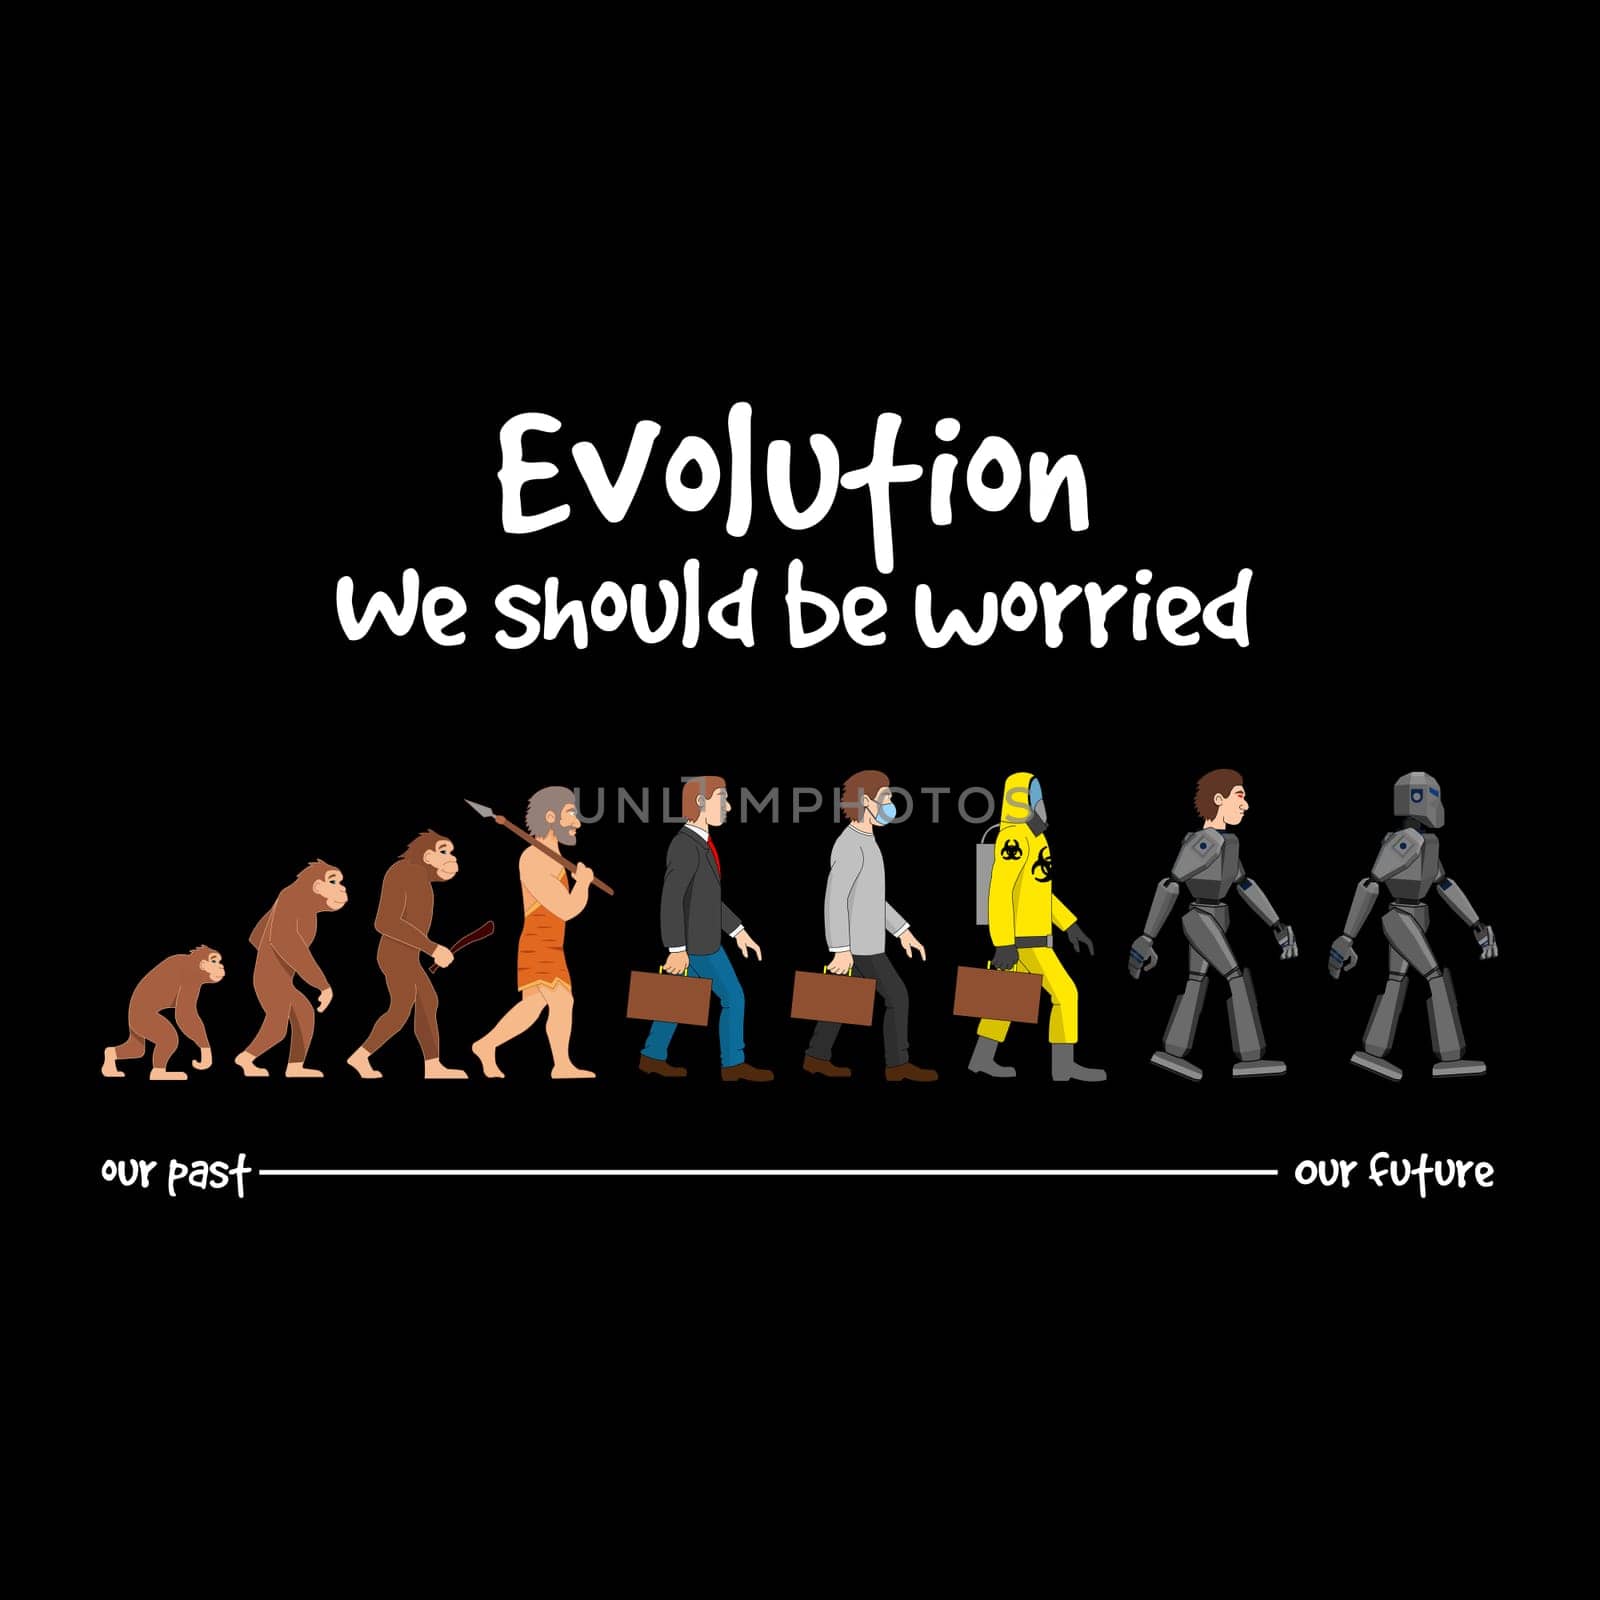 Evolution - we should be worried by Bigalbaloo